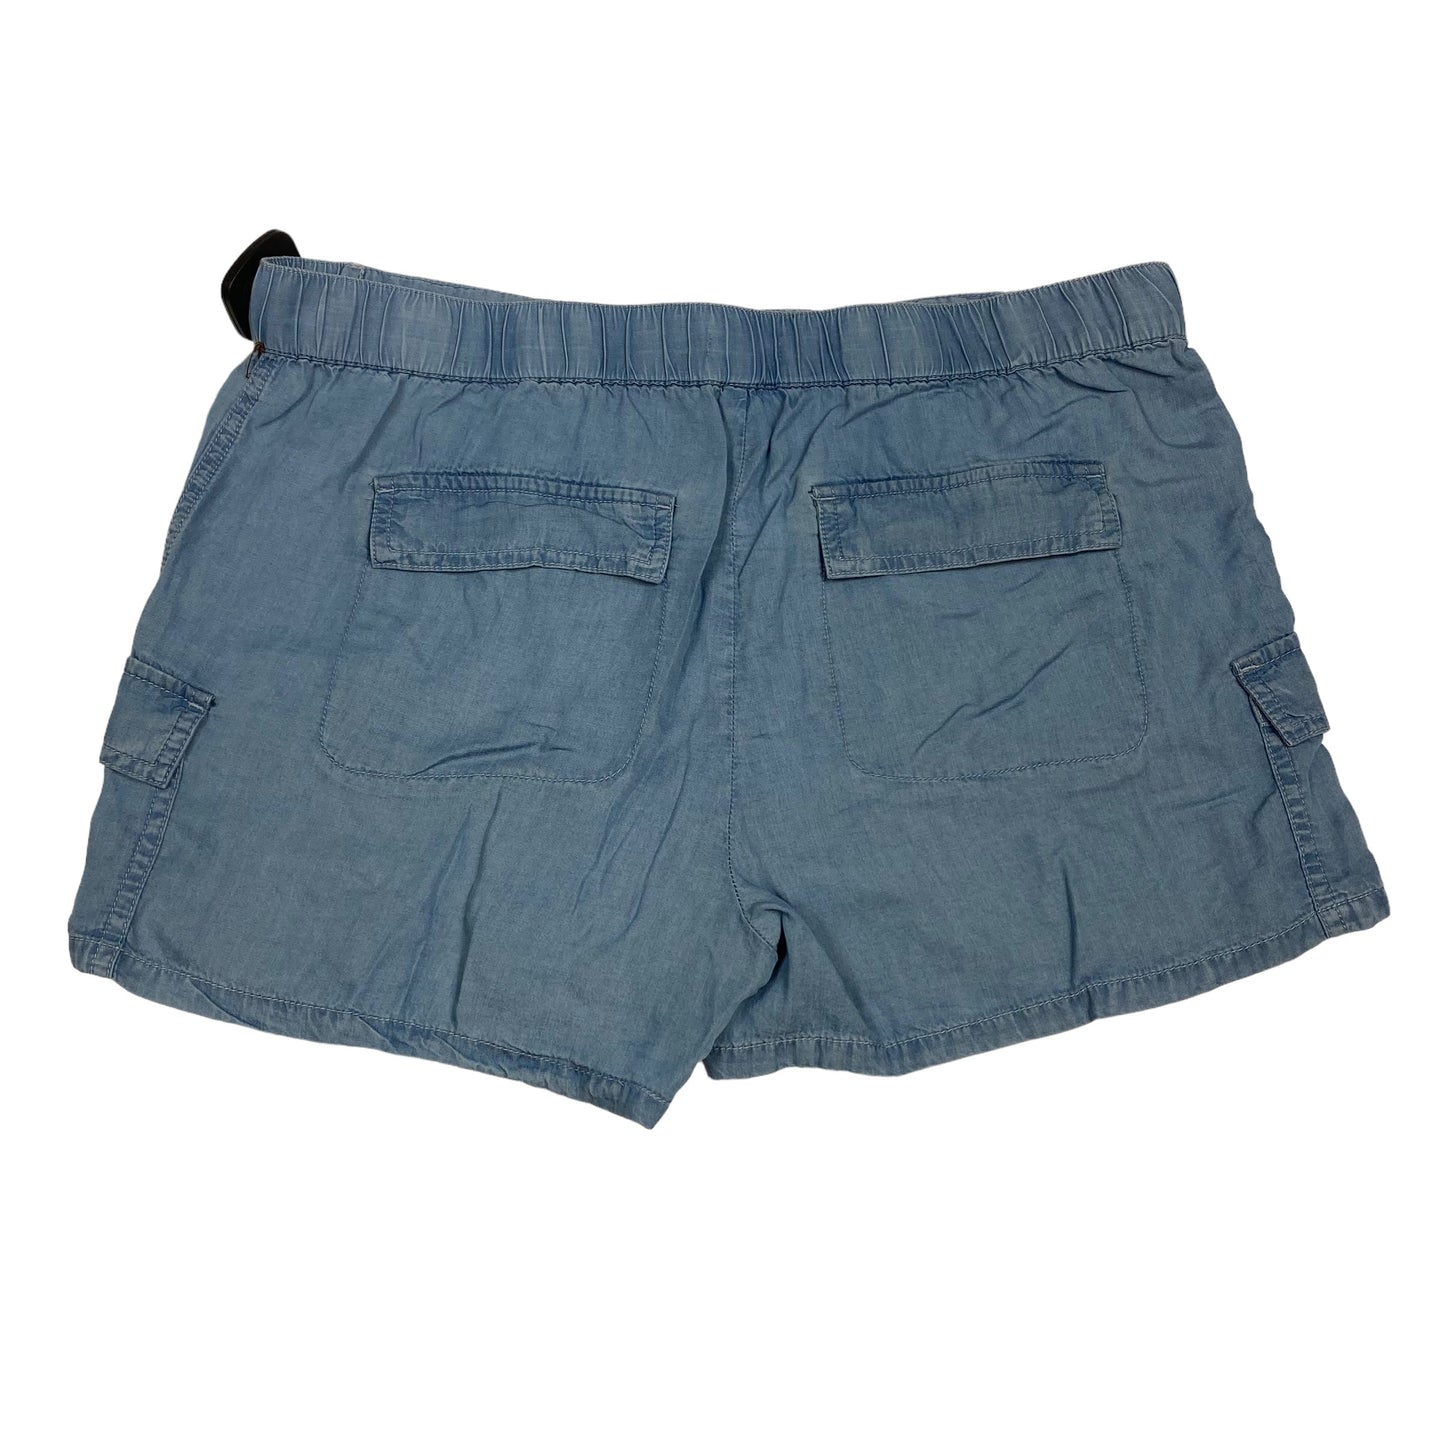 Shorts By Willow & Clay  Size: L